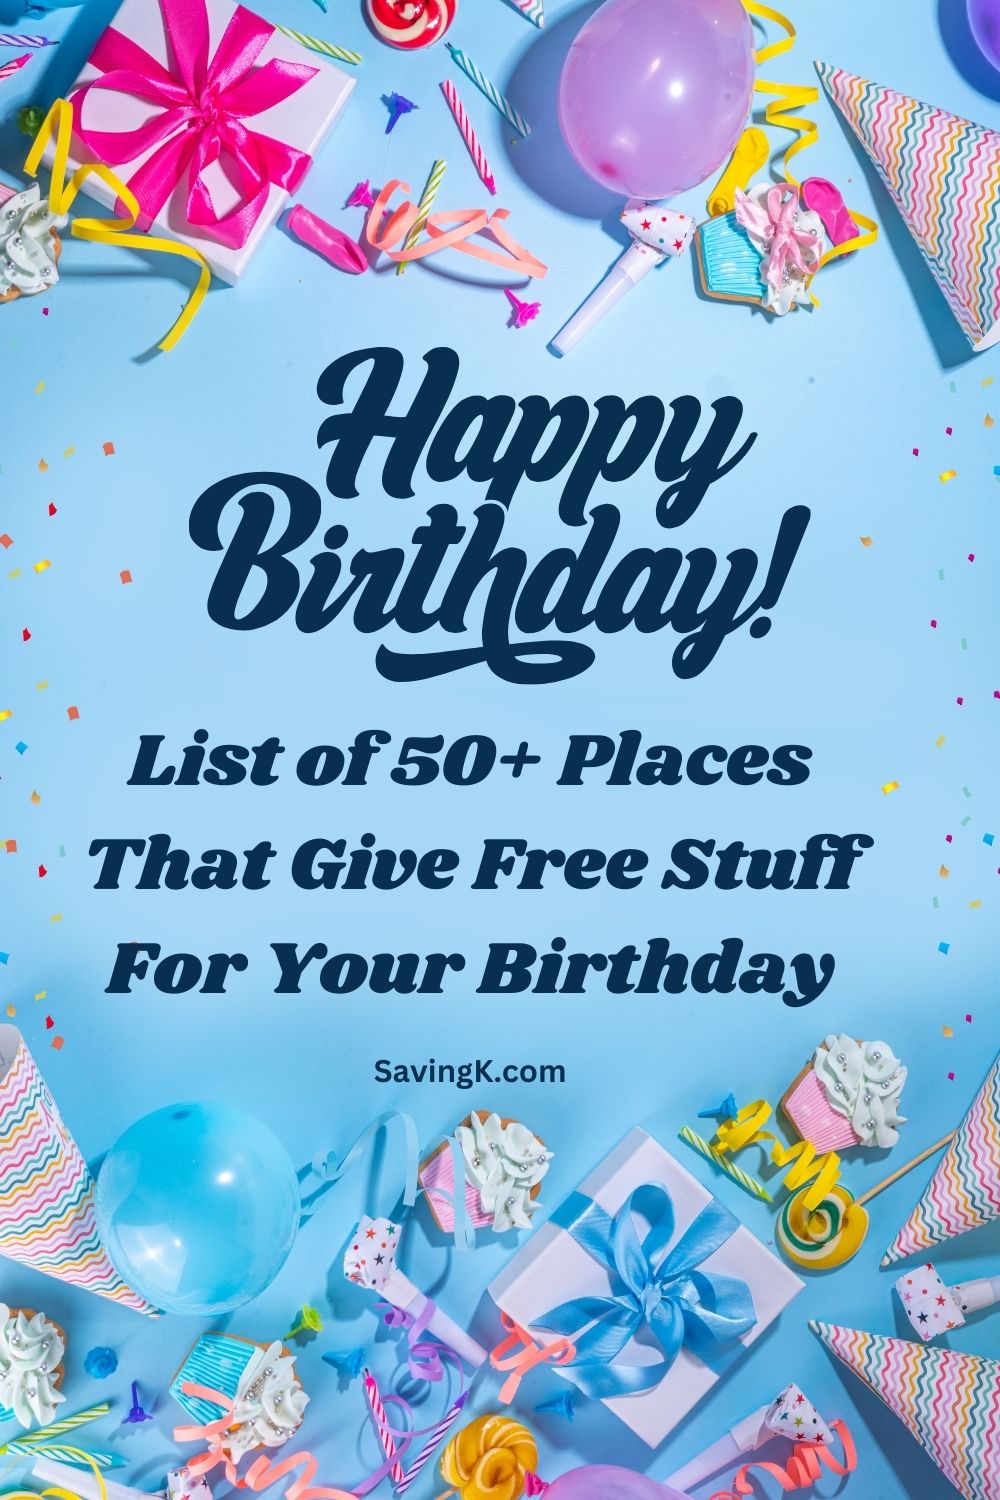 50+ Places That Give Free Stuff On Your Birthday